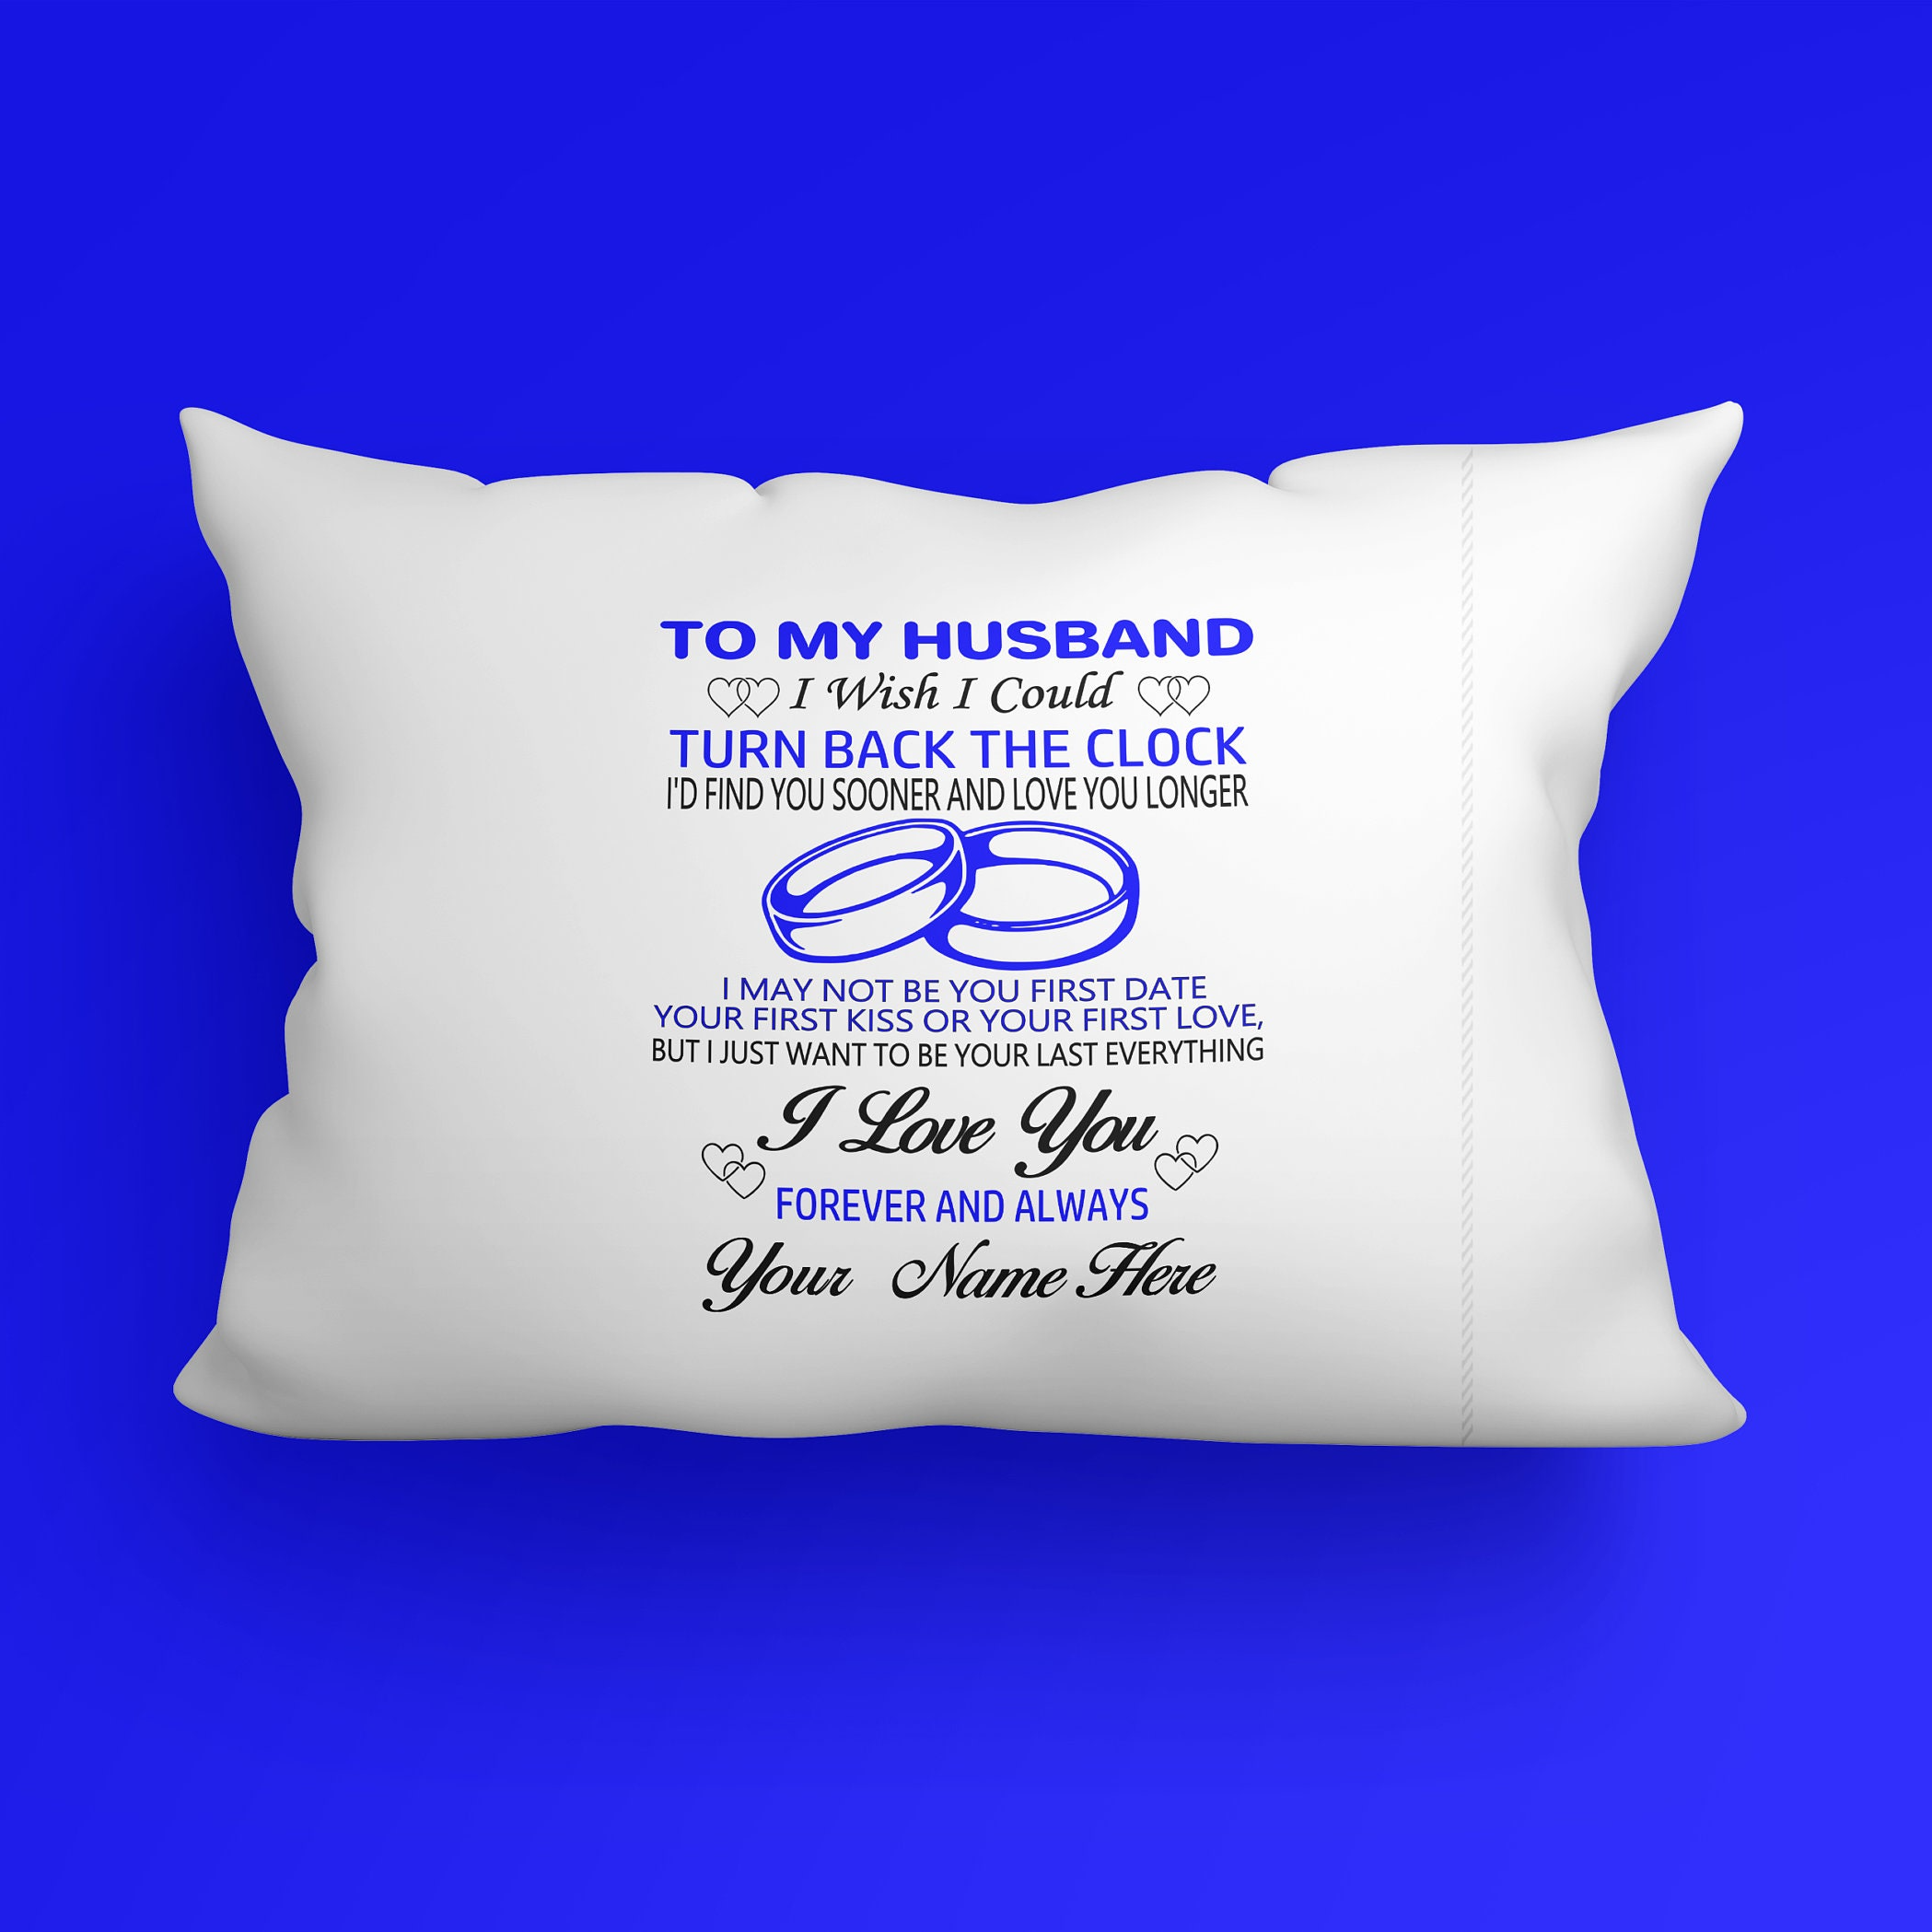 To My Husband - Be Your Everything - Personalized Pillowcase